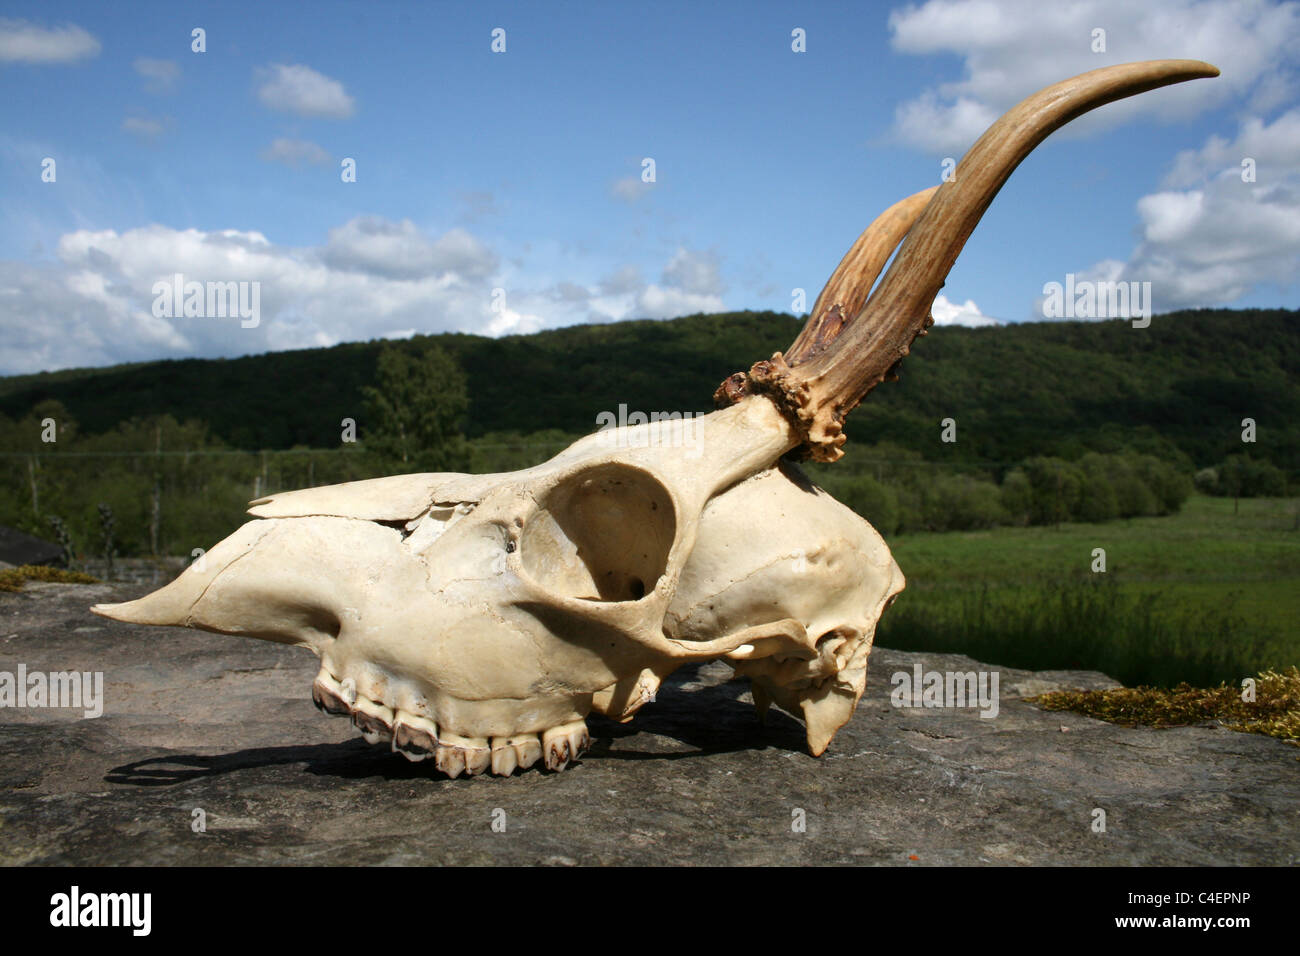 Skull And Antlers Of A Two-year Old European Roe Deer Capreolus capreolus Buck, Cumbria, UK Stock Photo